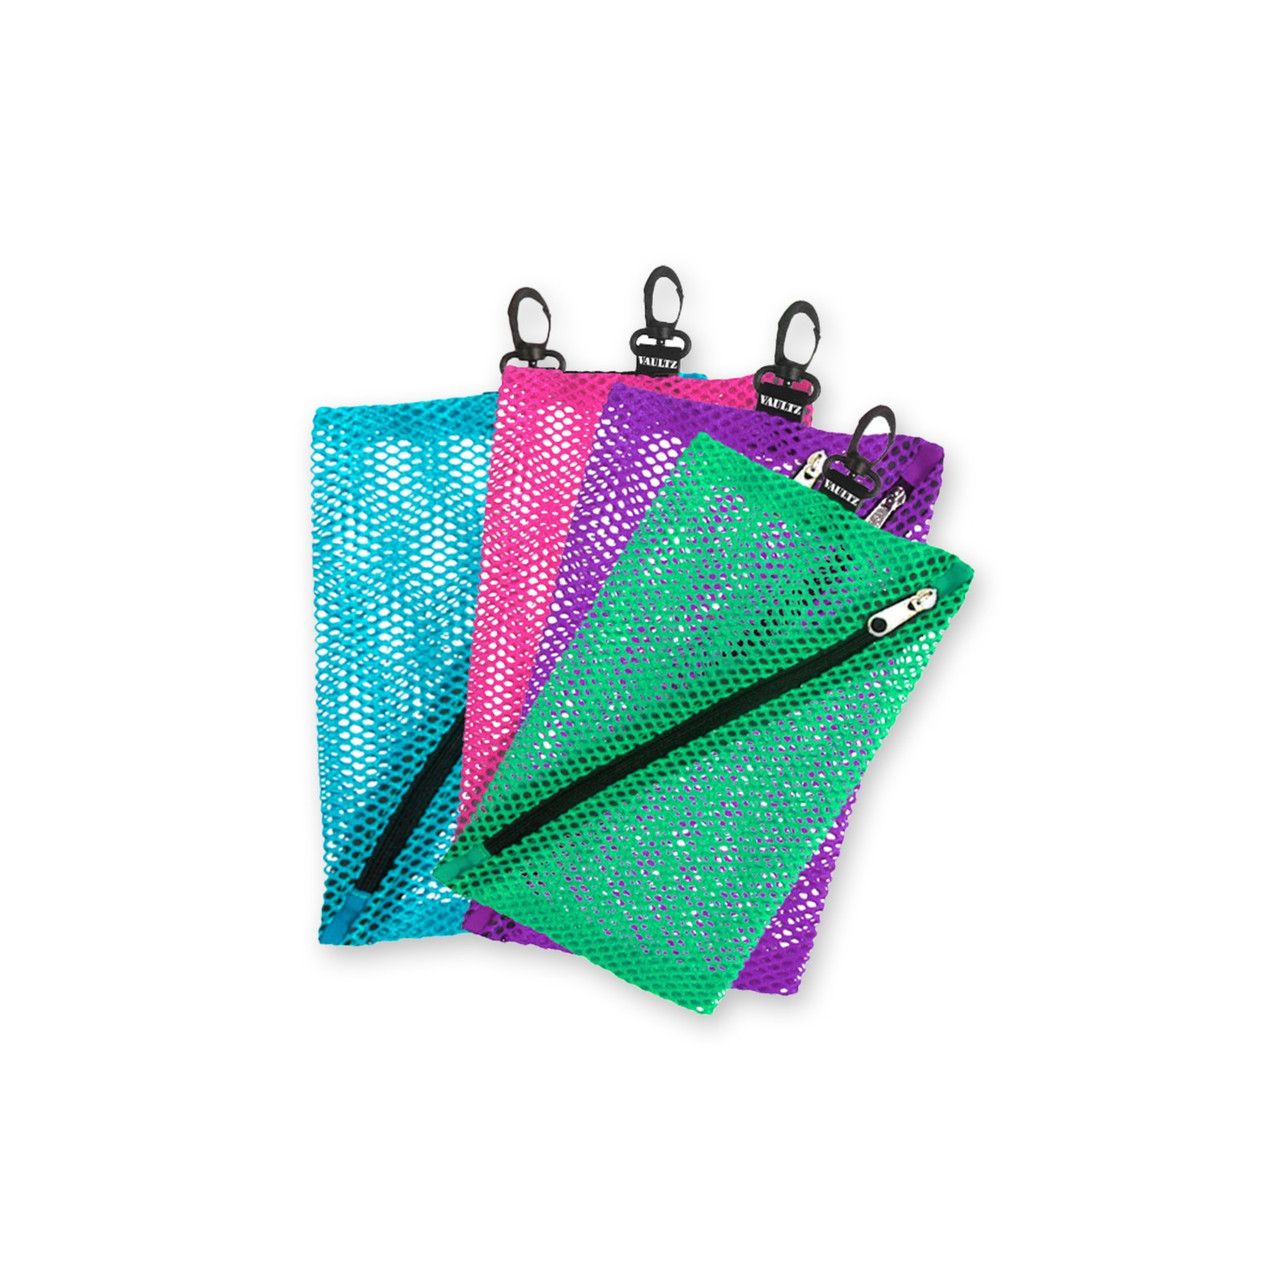  Vaultz Mesh Zipper Pouch Set - Pack of 4 - Mesh Pouch Zipper  Bags for Organizing, Storage, Travel, School, Cosmetics - Small, Medium &  Large Assorted Bag Sizes - Boys Asst Colors : Office Products